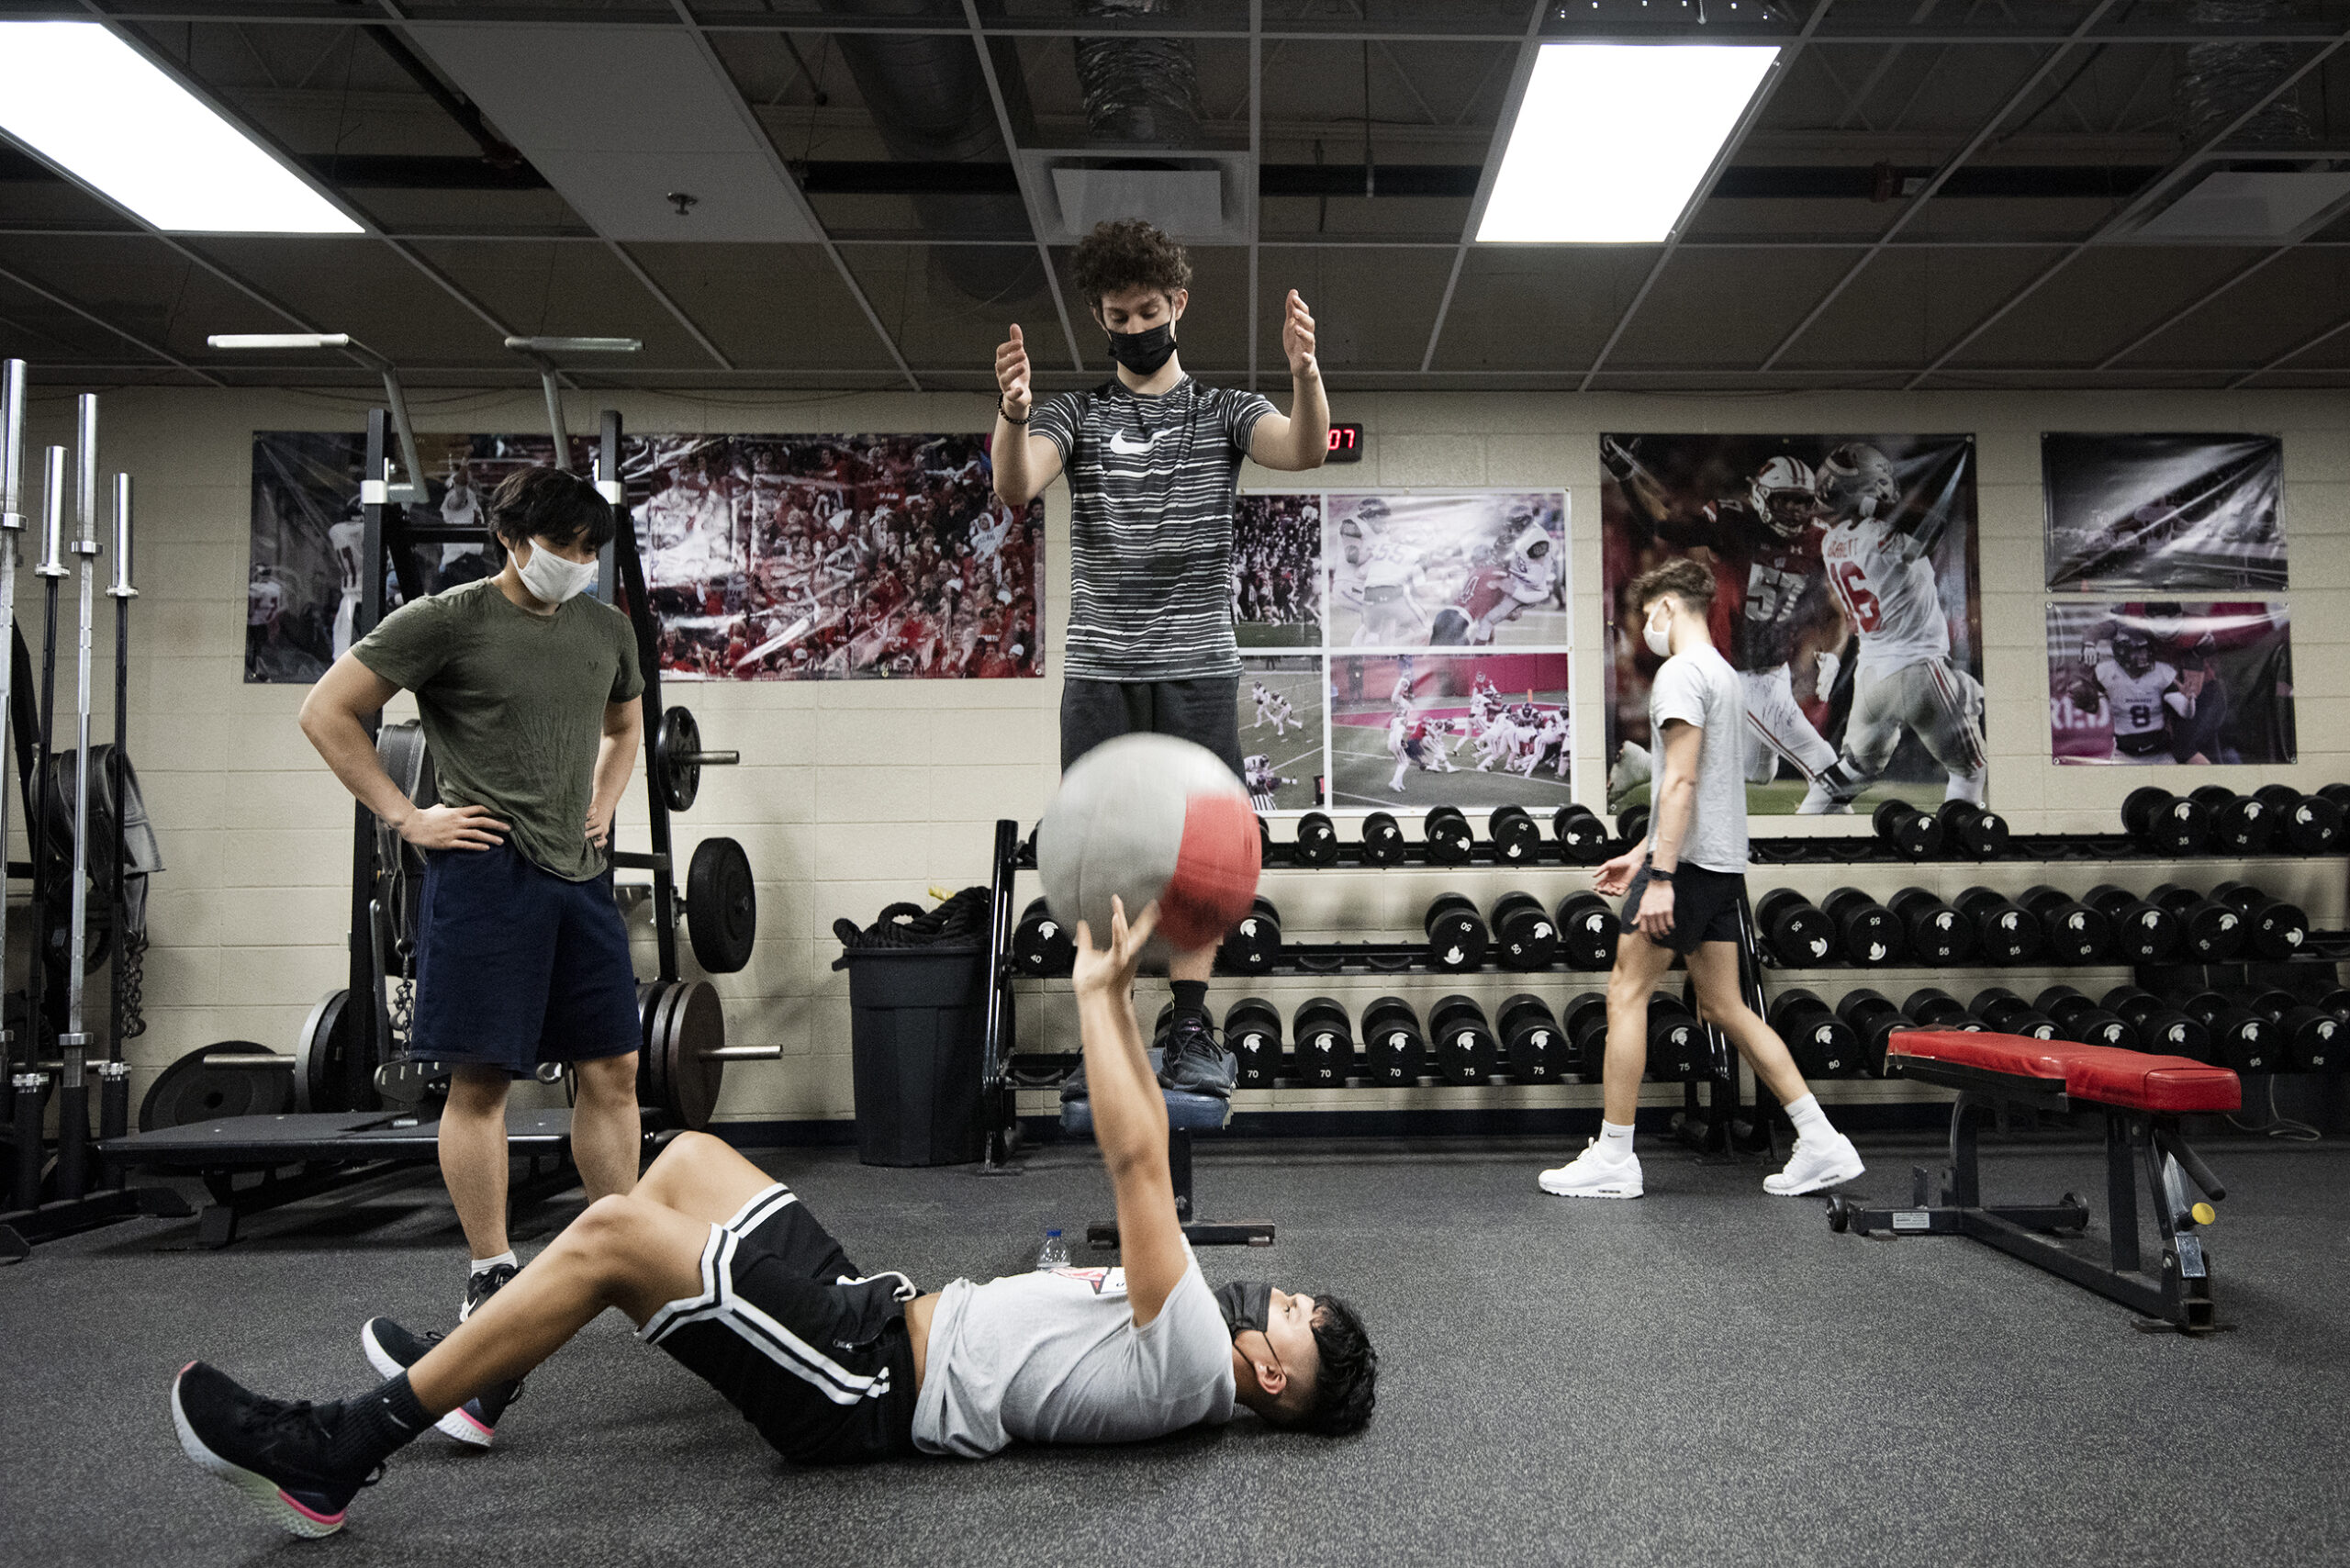 High school students wearing face masks throw a medicine ball in a PE class.